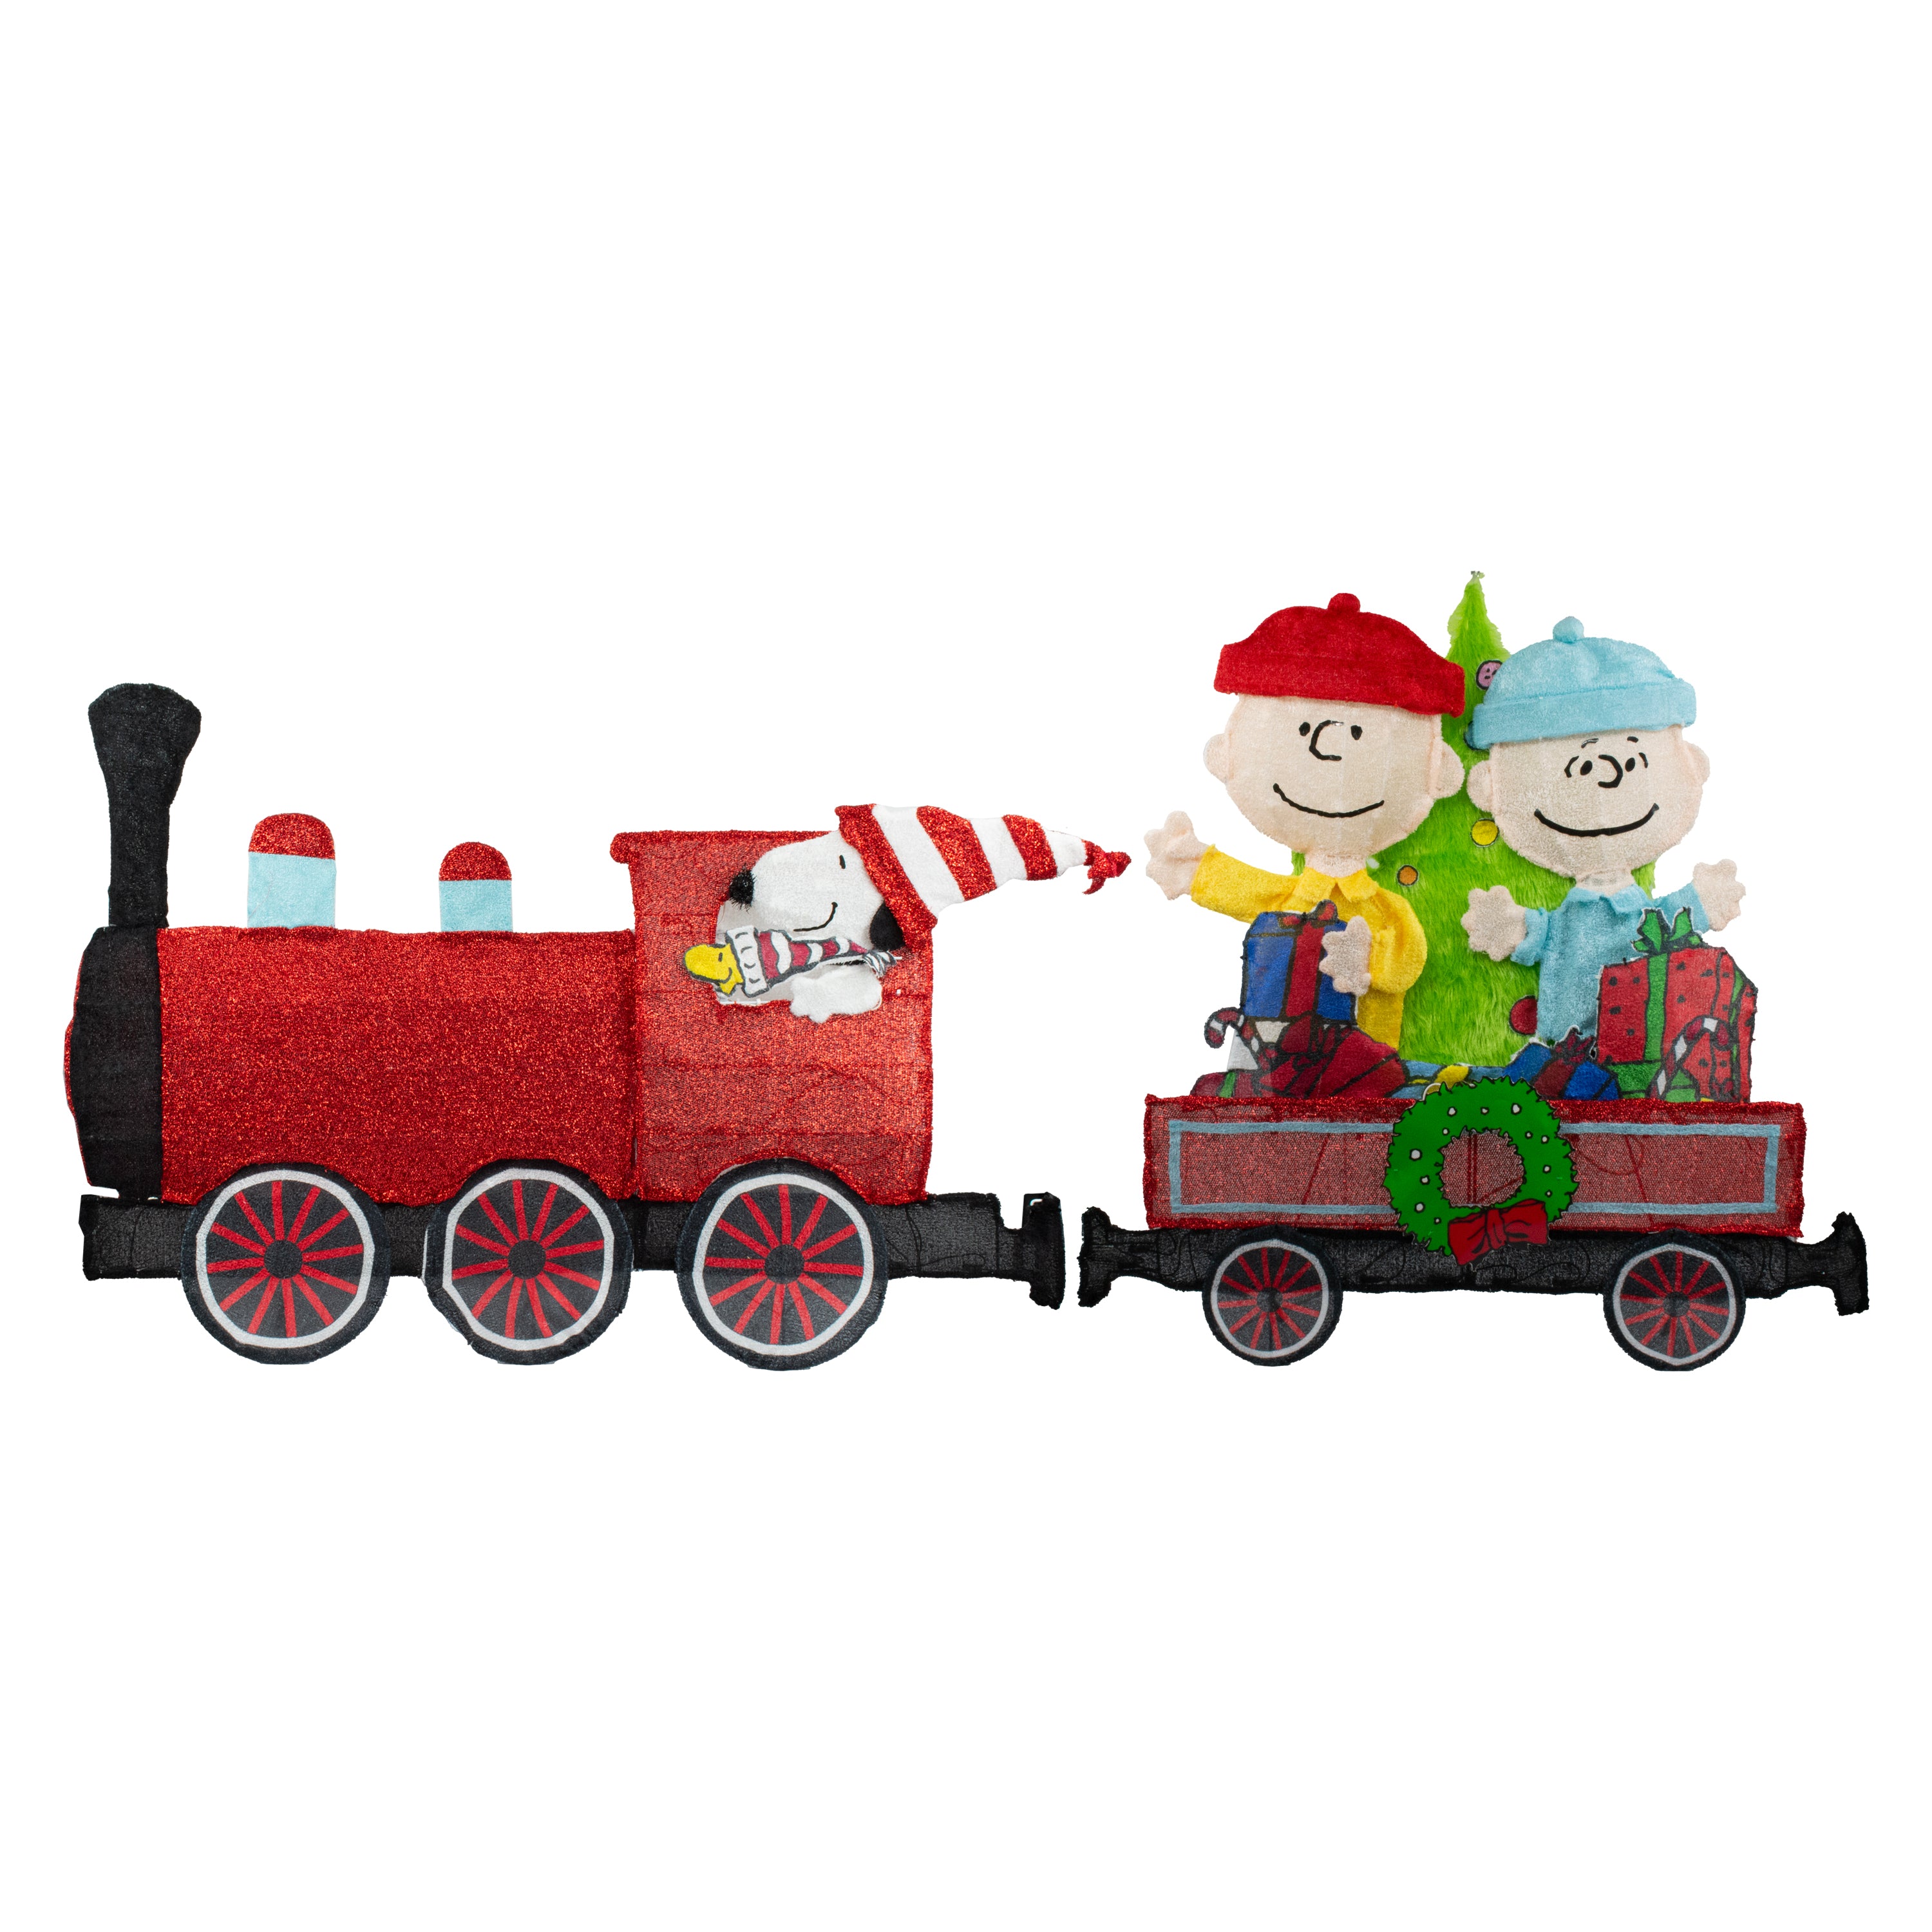 ProductWorks 79IN WIDE PEANUTS PRE LIT LED 2D YARD ART TWO PIECE TRAIN SET, Red